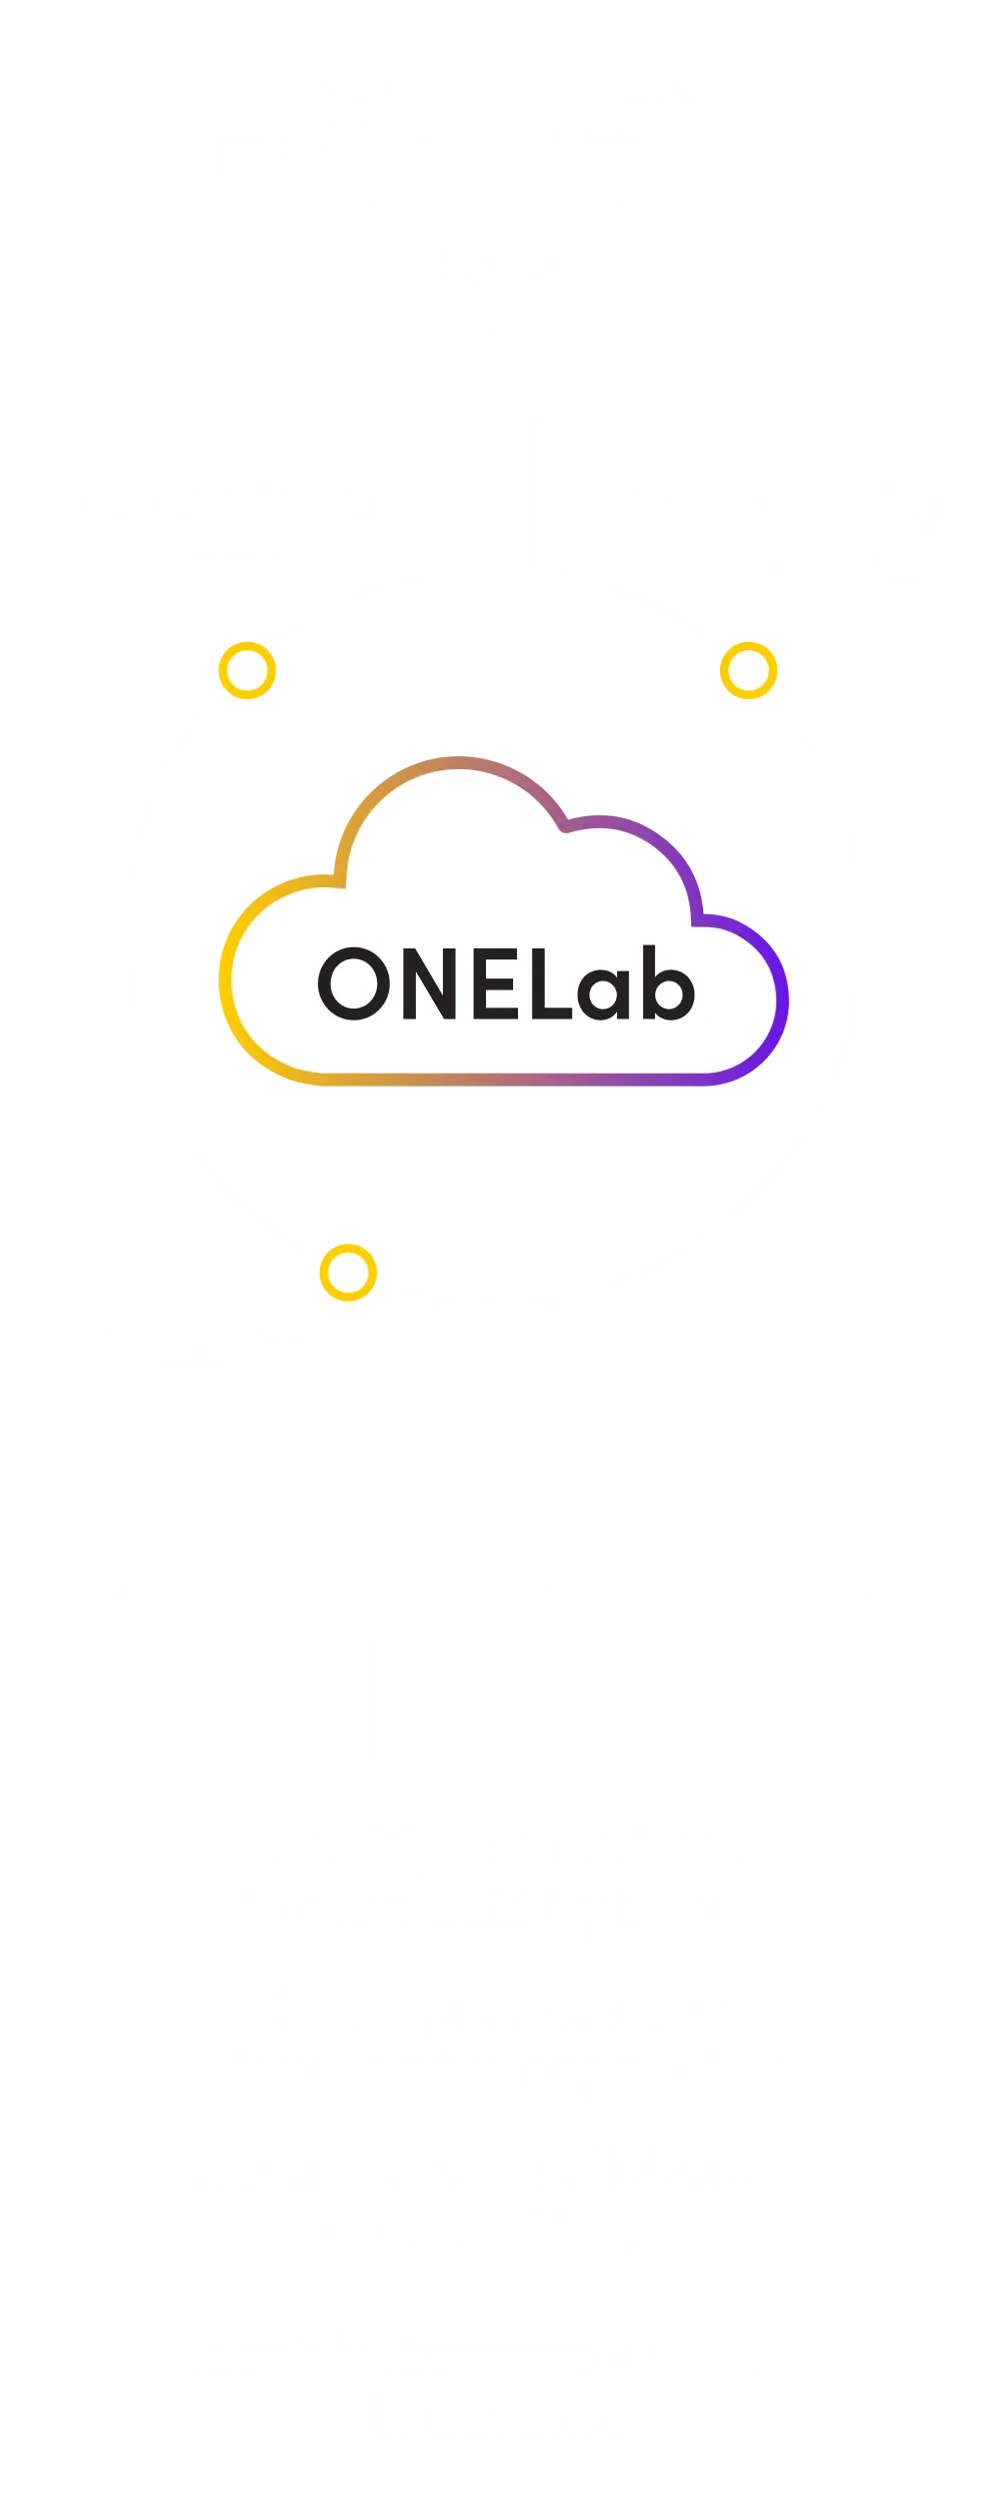 diagram explaining how onelab innovation is done at each stage of the lifecycle